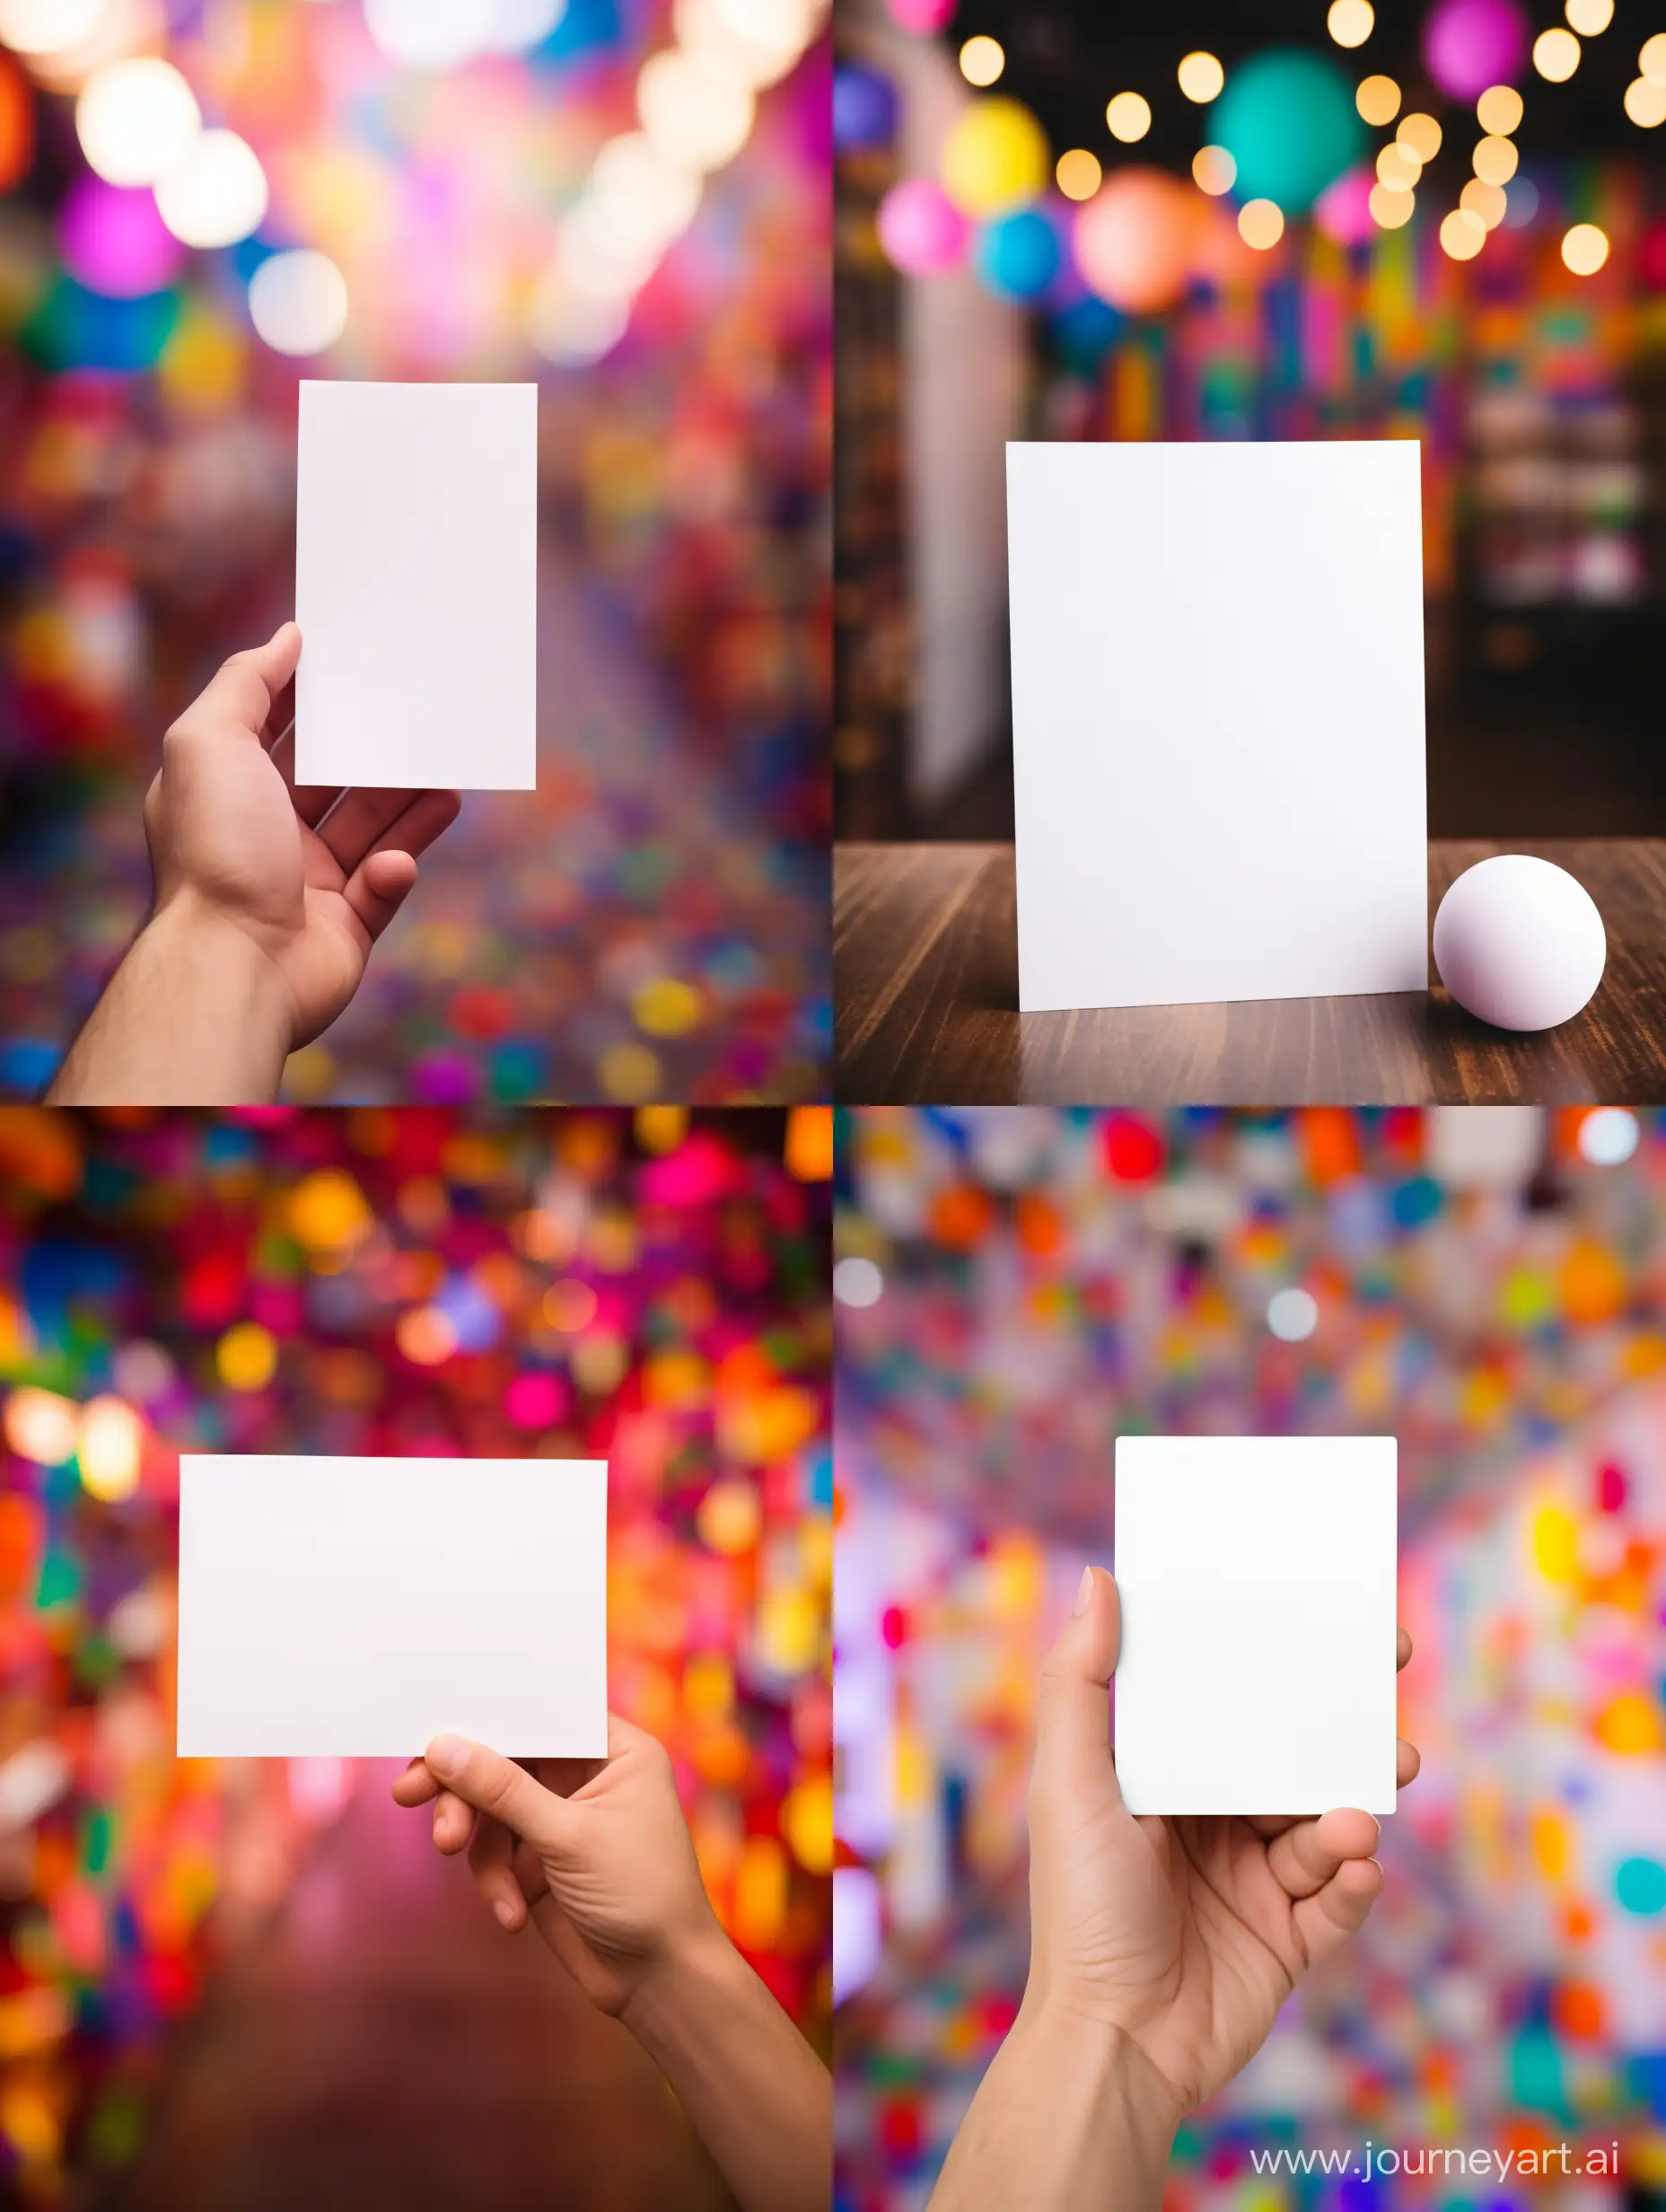 Creative-Hand-with-Blank-Paper-in-Colorful-Room